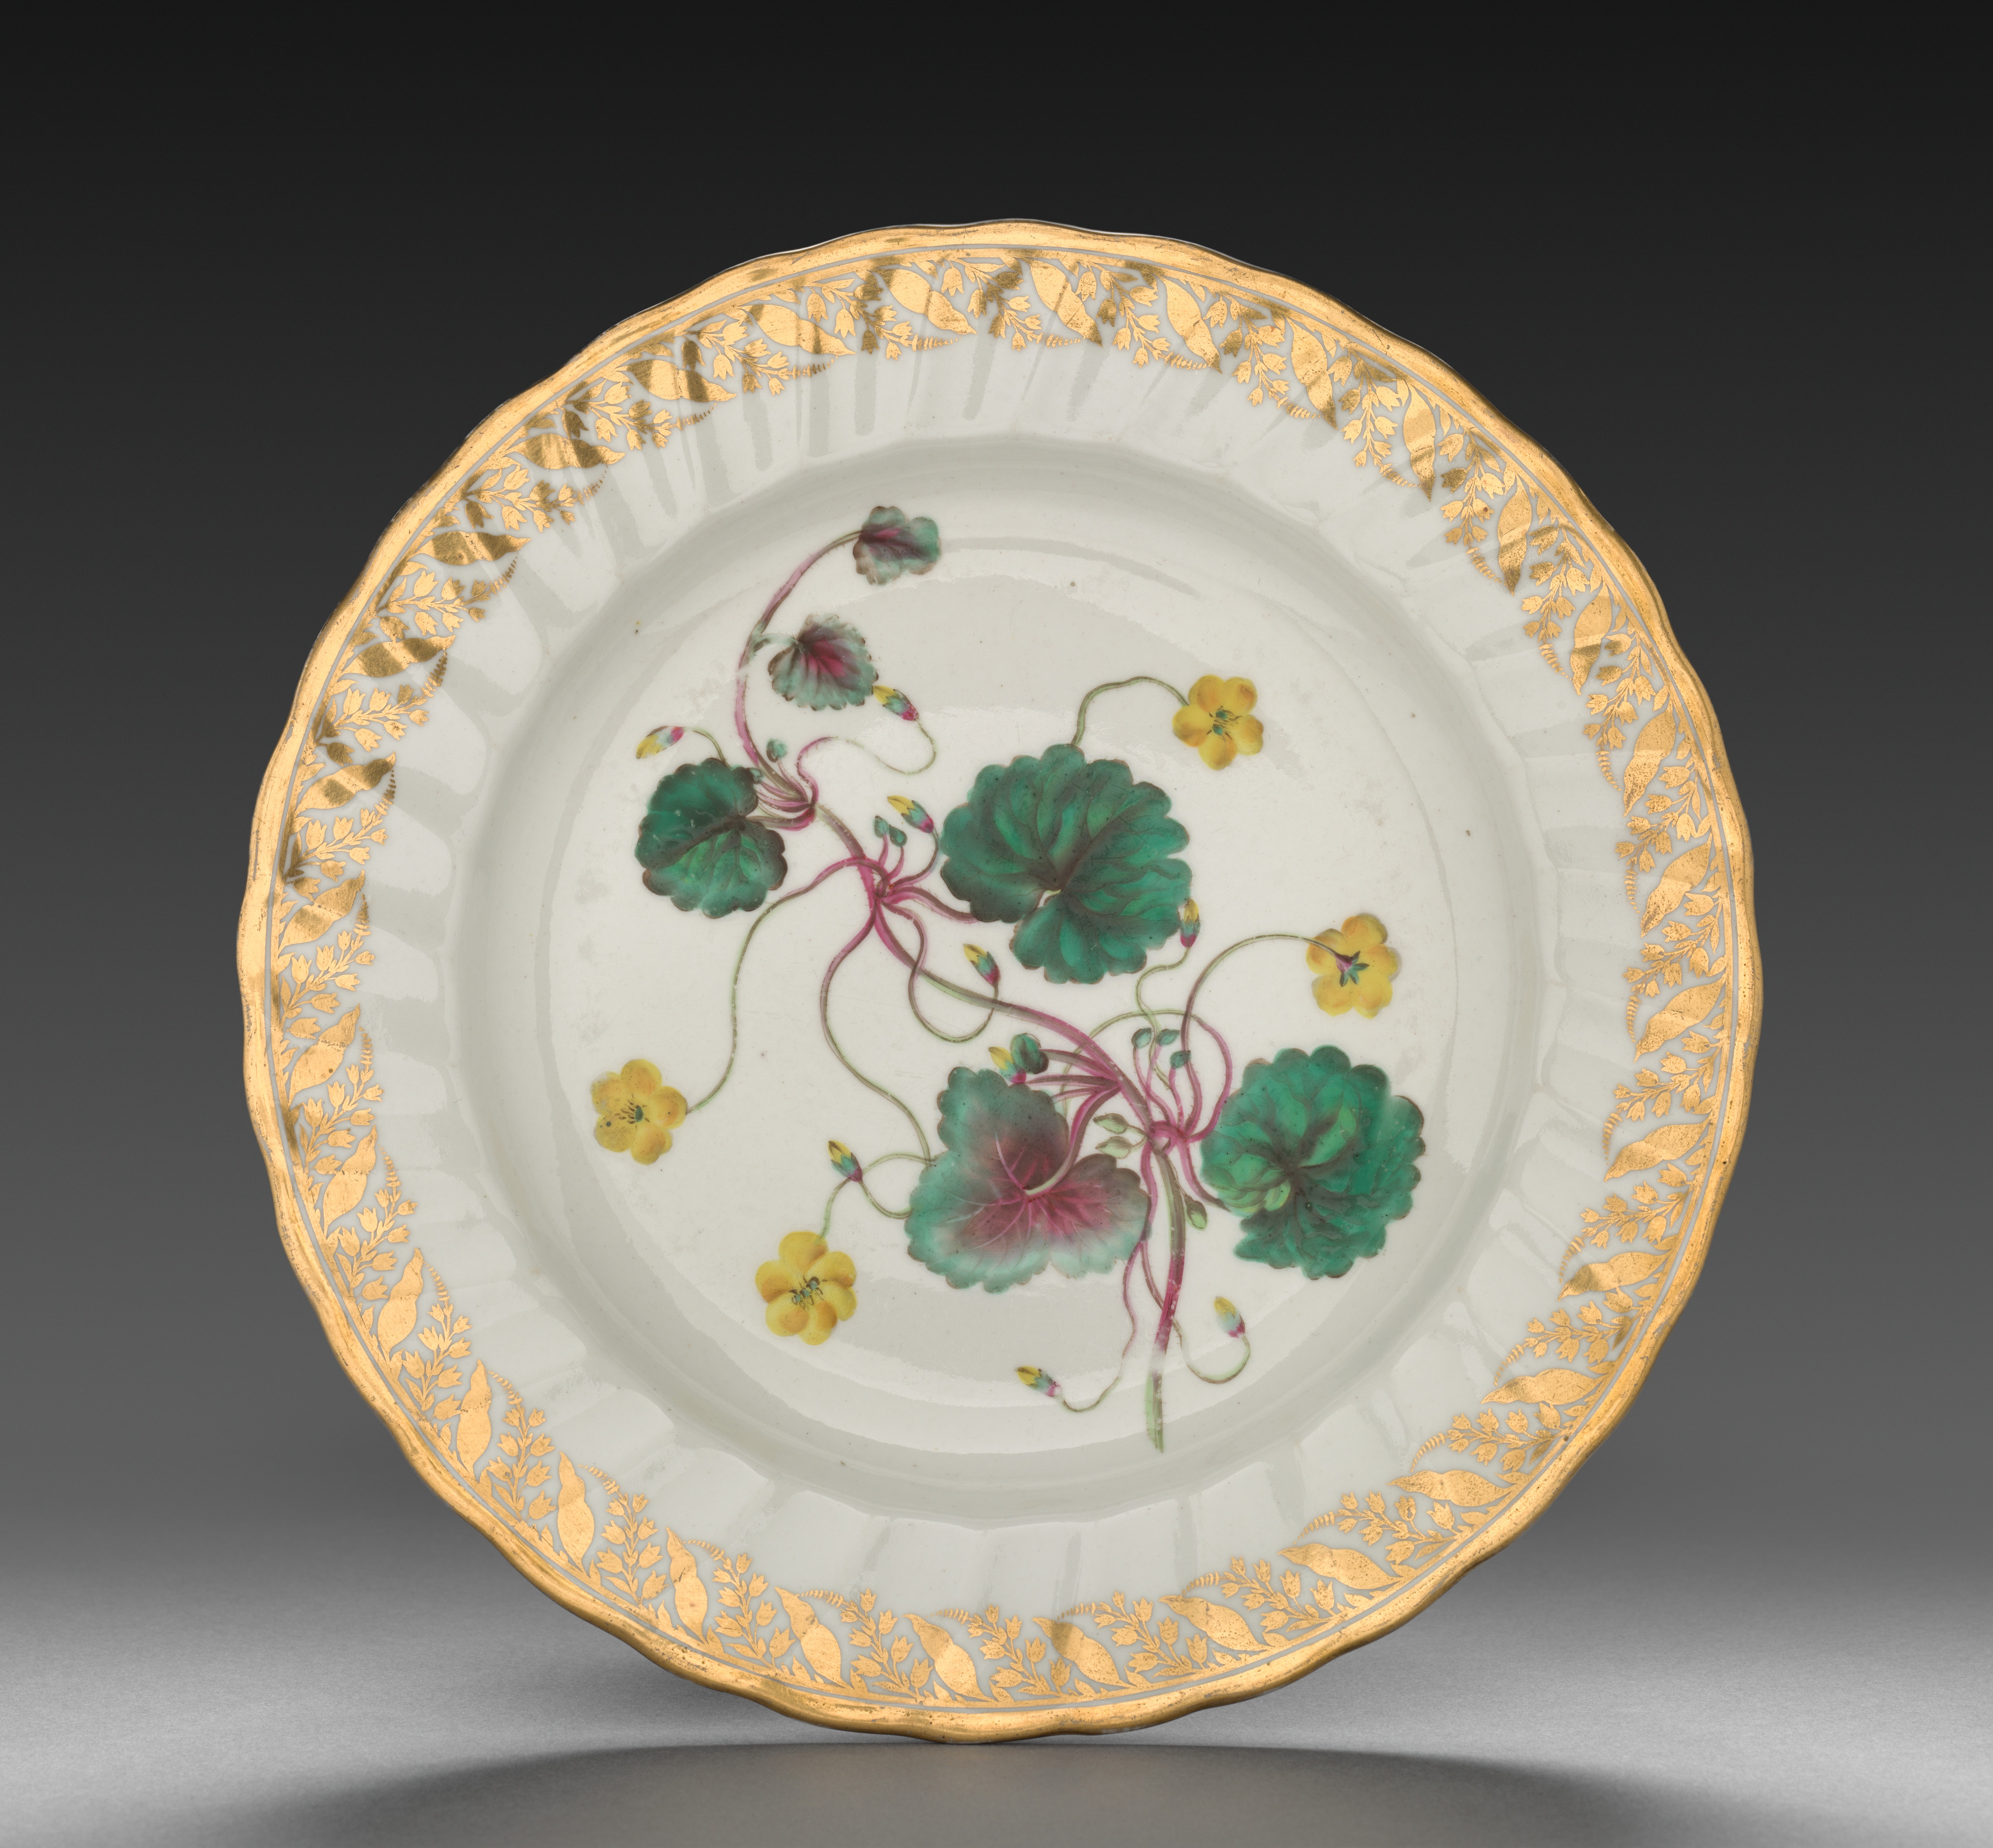 Plate from Dessert Service: Trailing Disandra